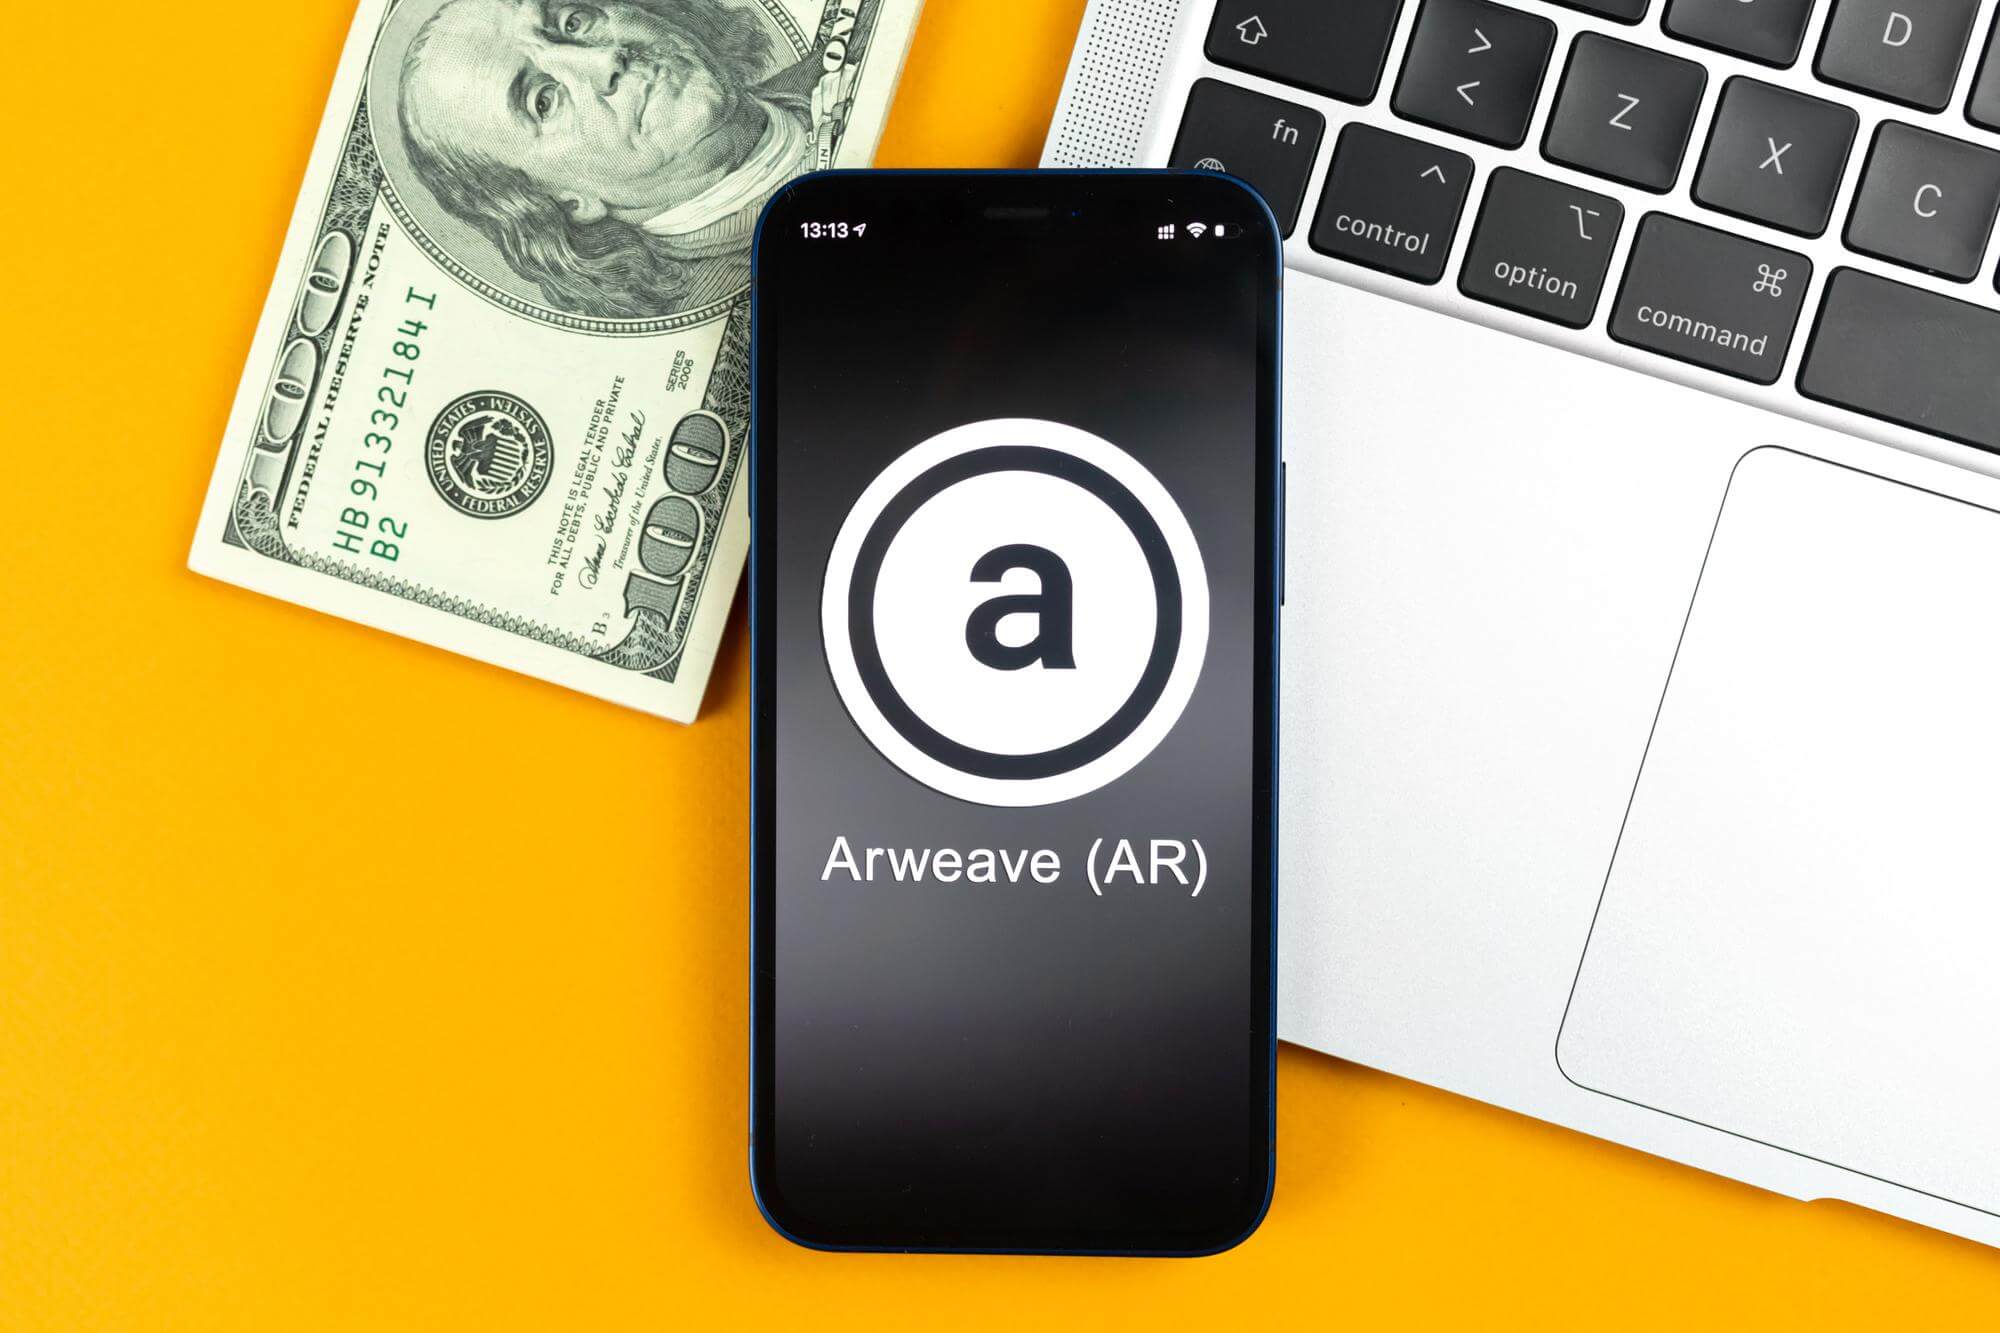 where can i buy arweave crypto